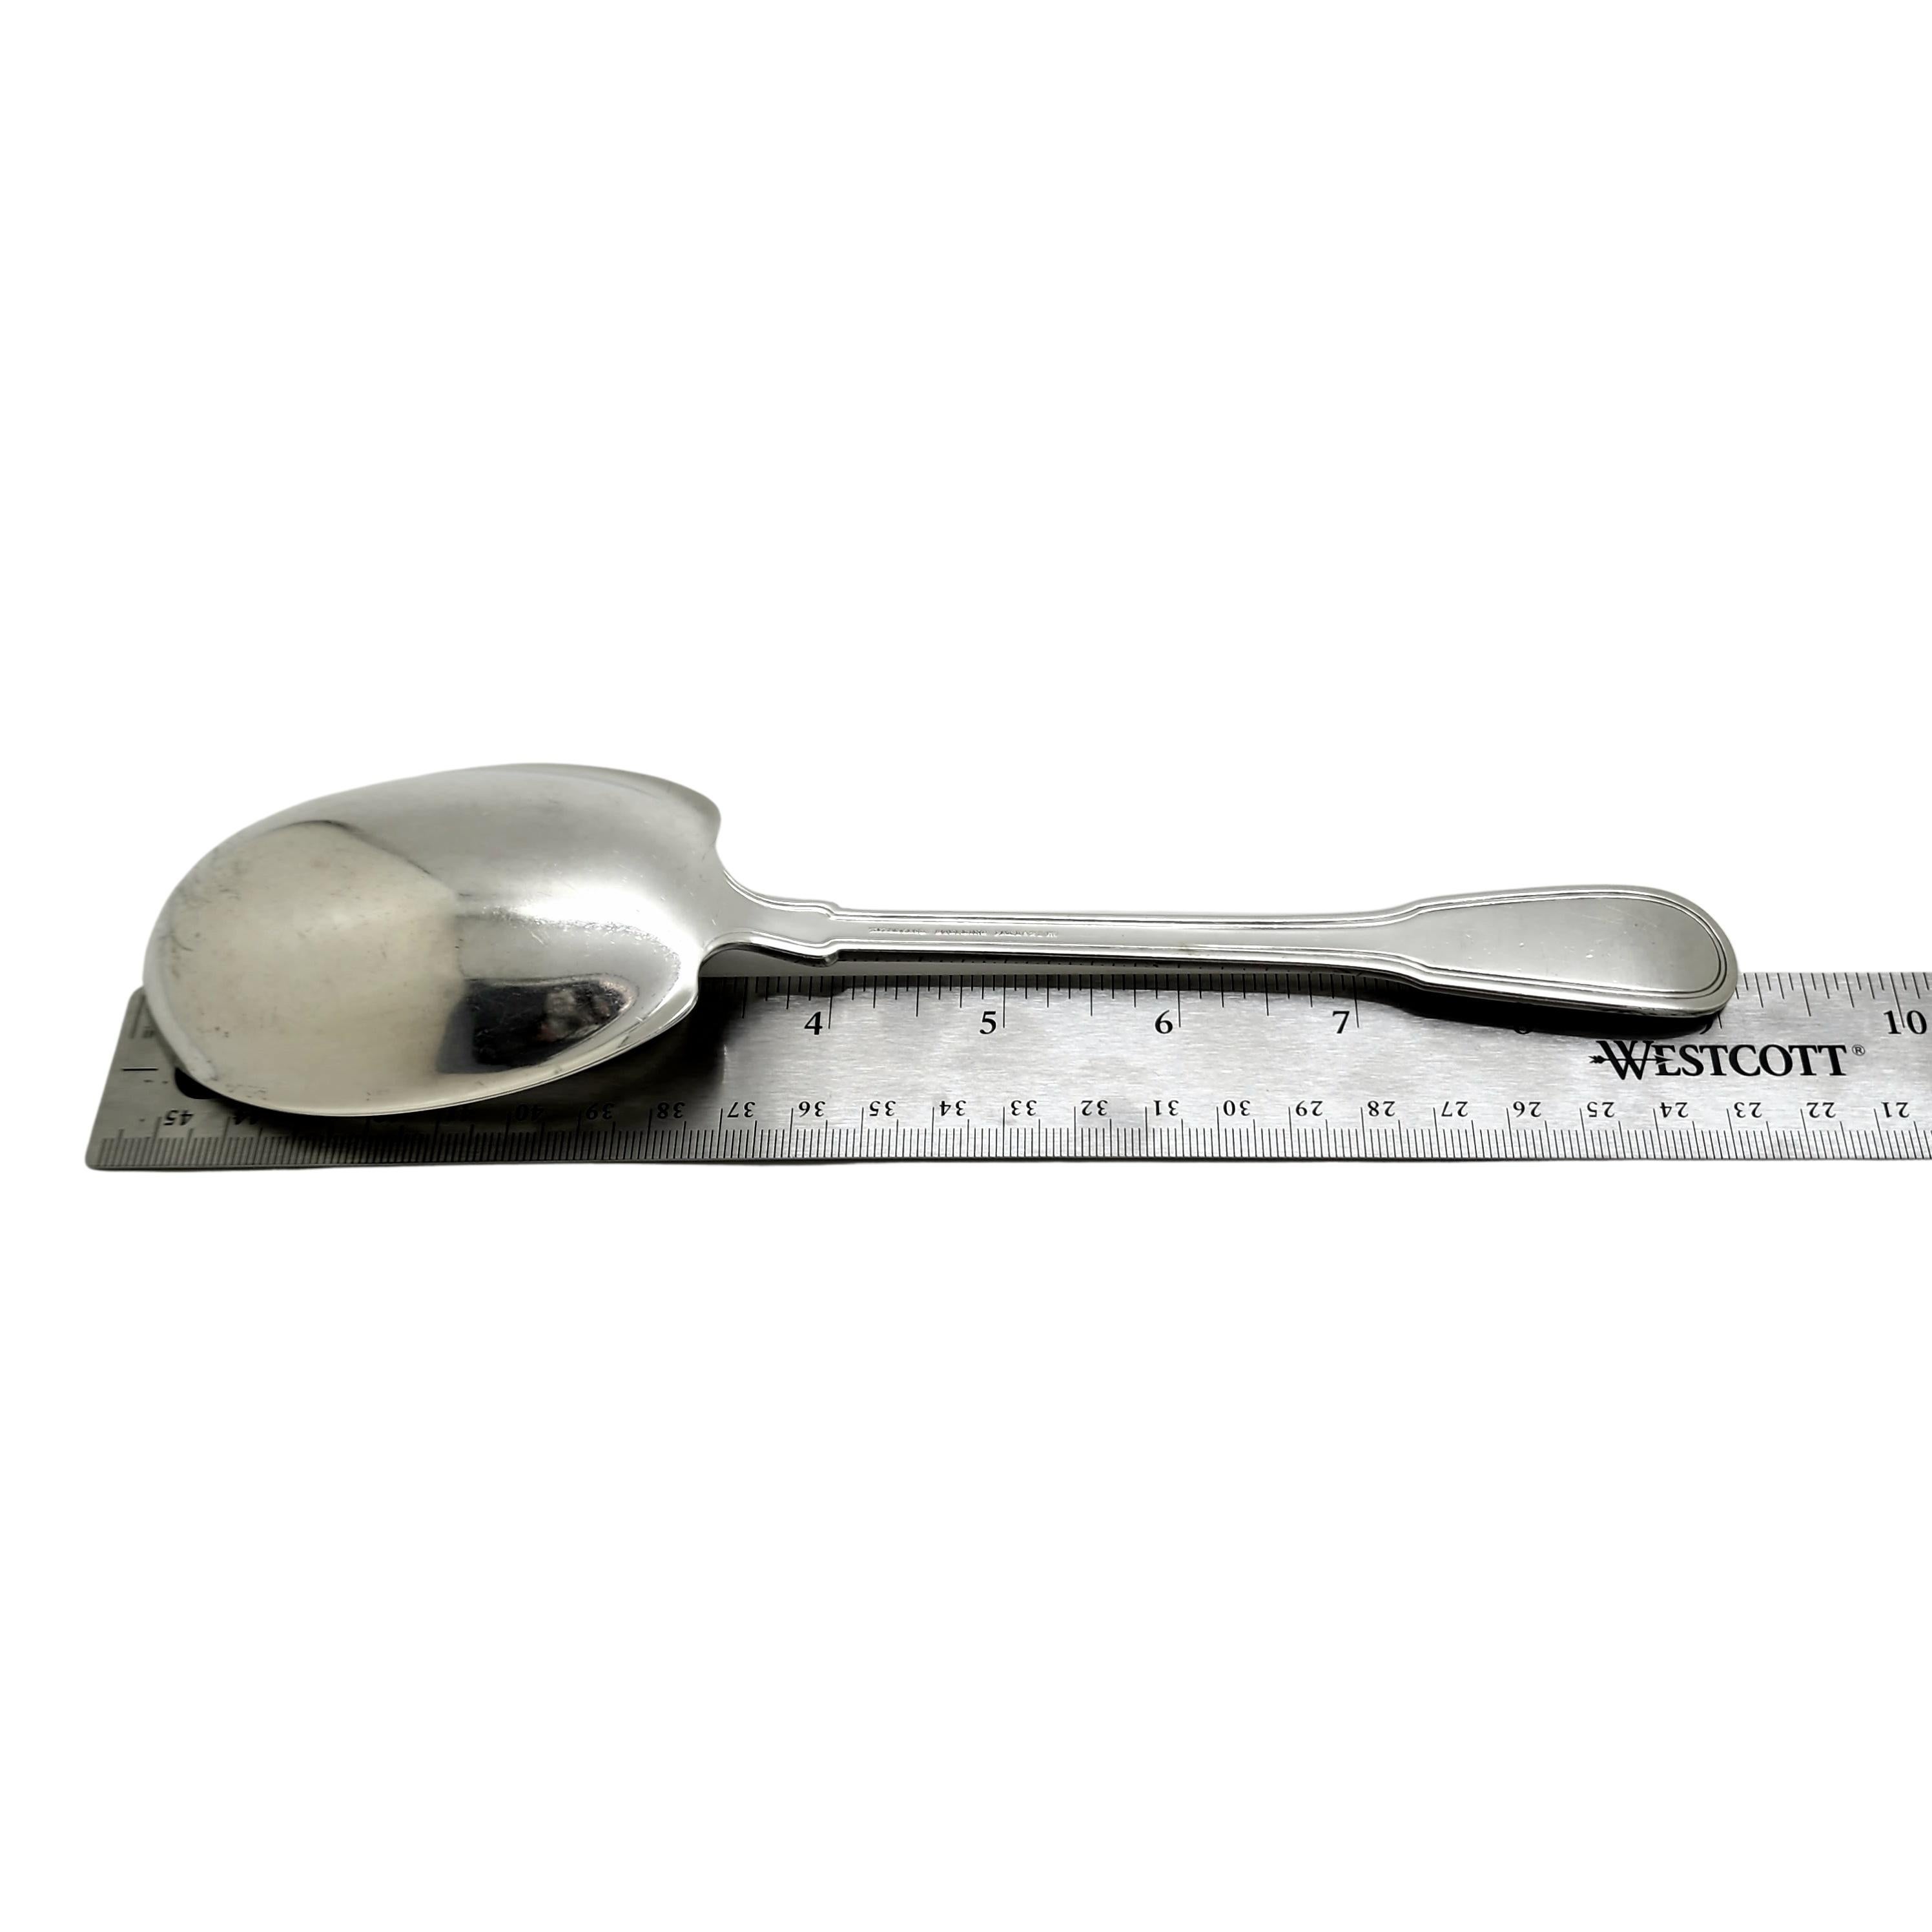 Sterling silver large solid berry/casserole spoon in the Hamilton pattern by Tiffany & Co with monogram.

Monogram appears to be C M over W J

This large spoon features a simple and classic rounded handle design. Does not include Tiffany & Co box or